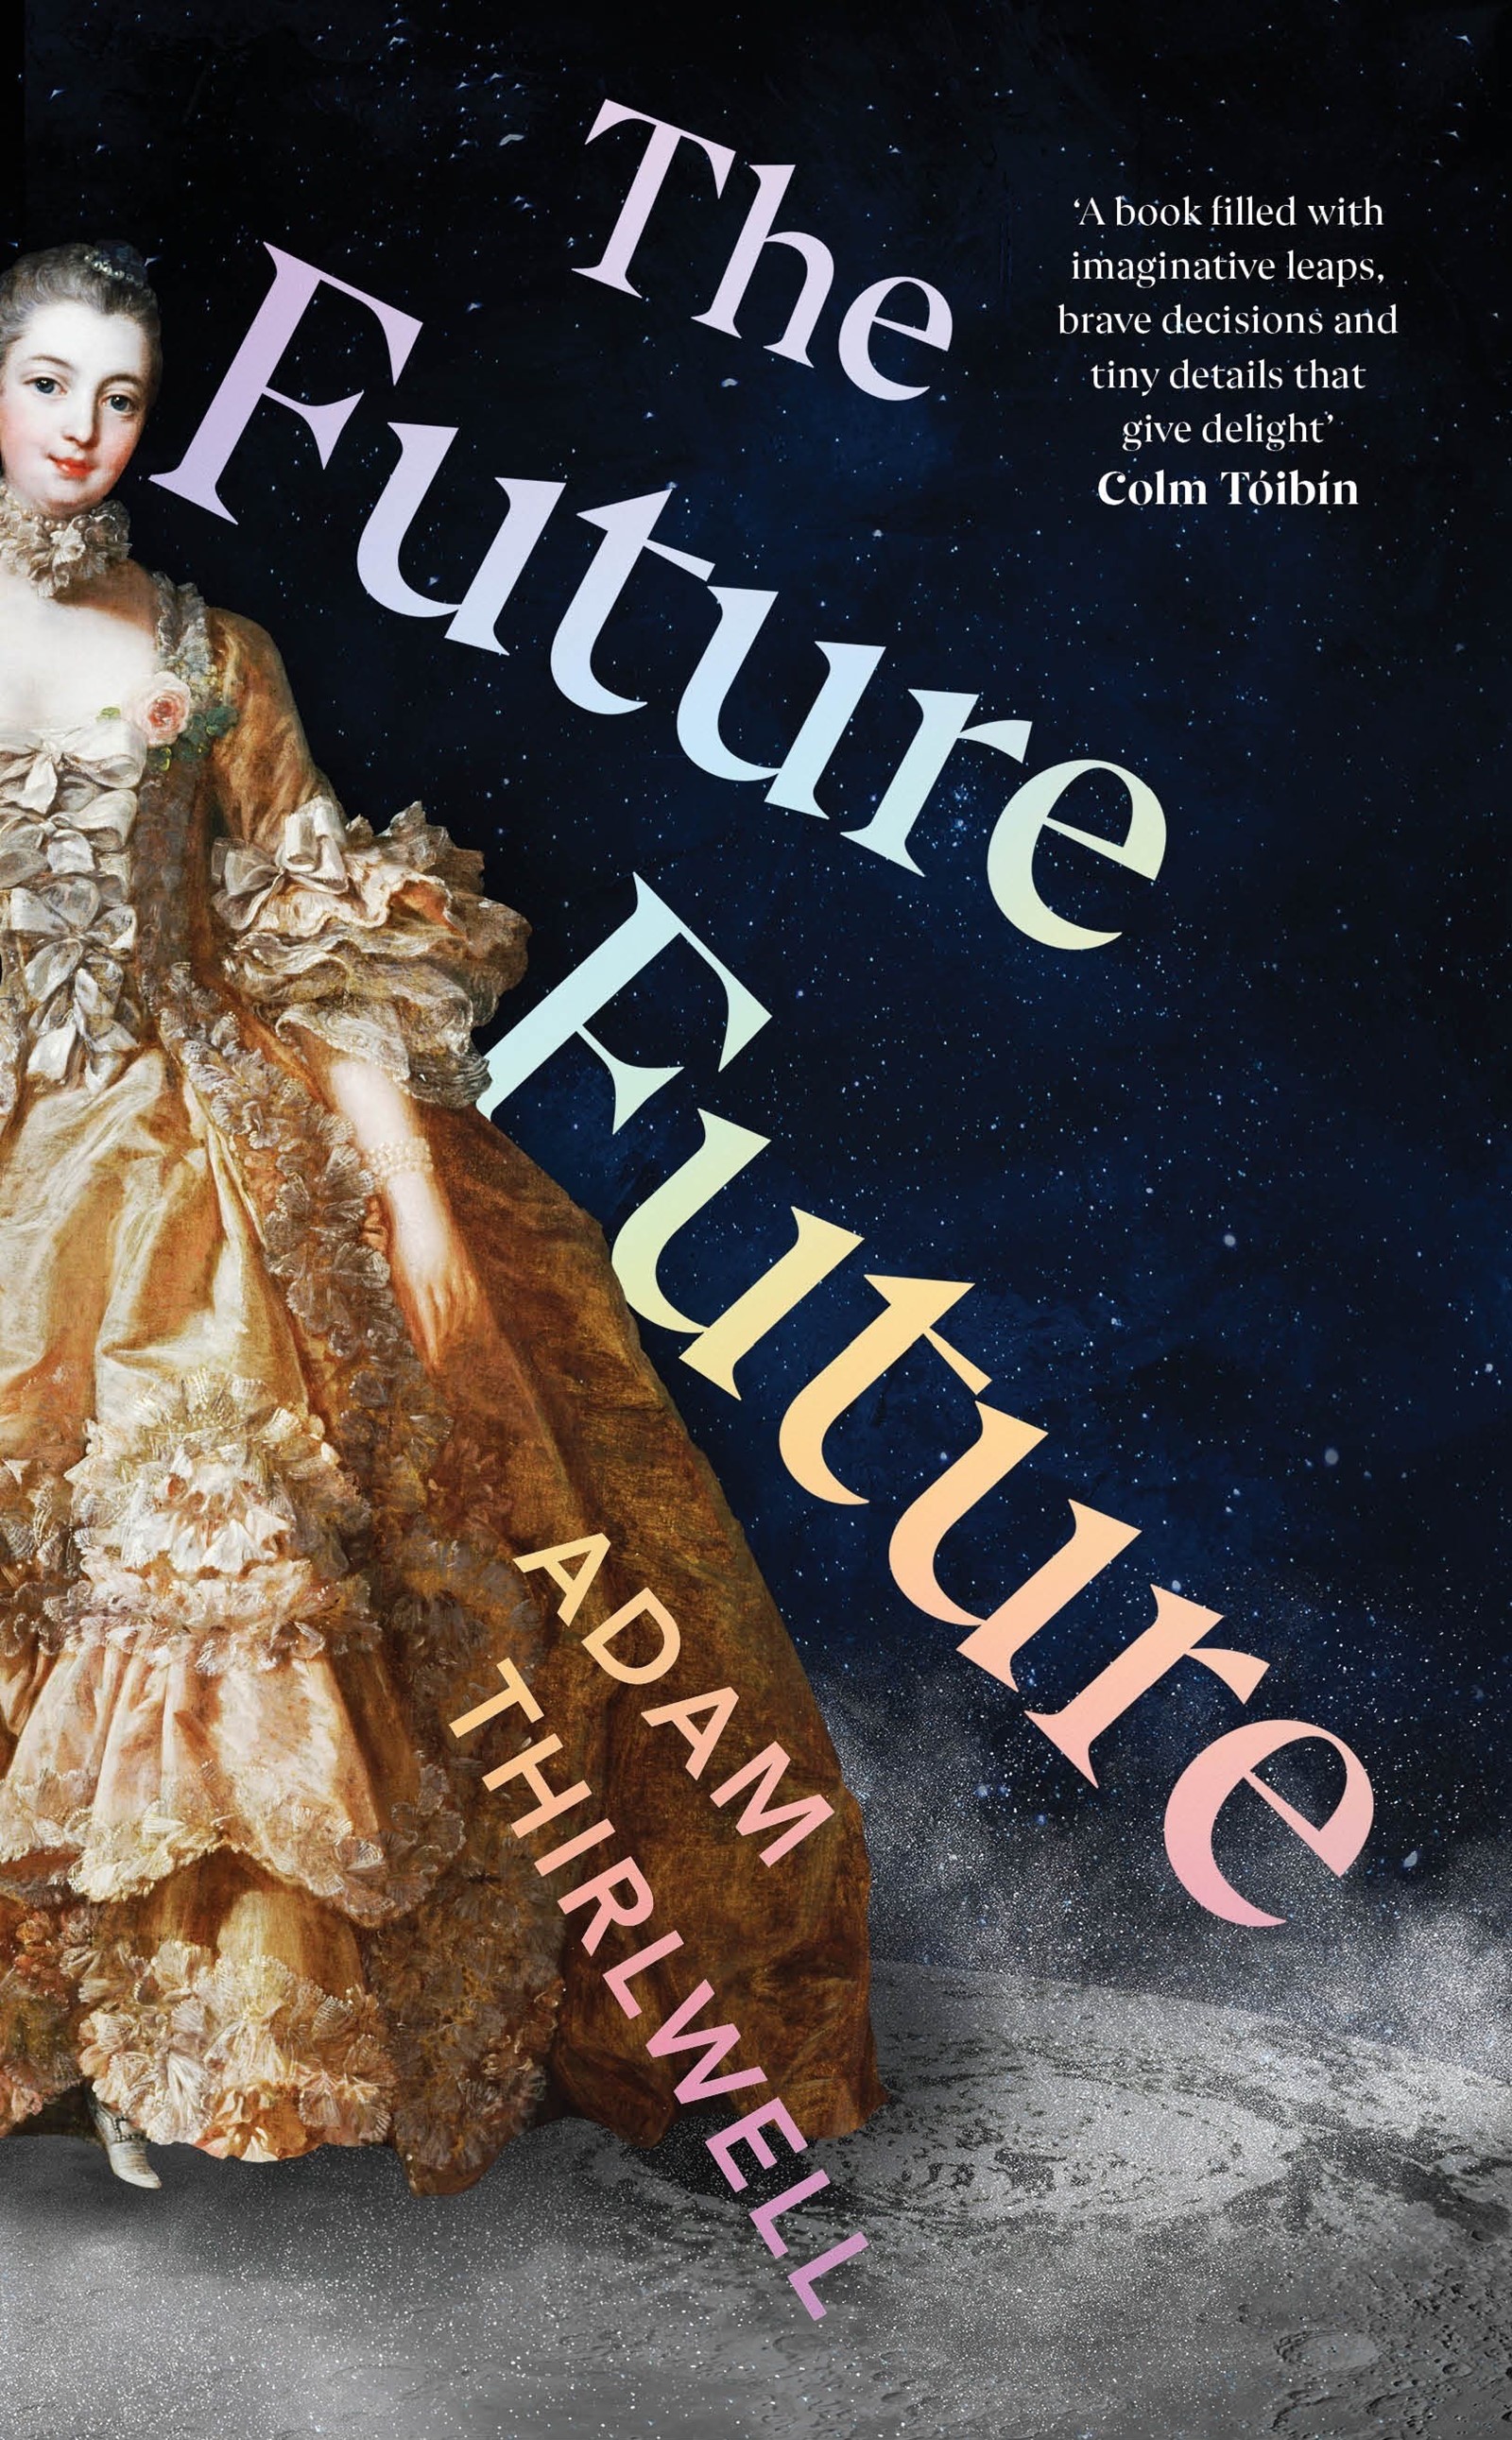 The Future Future by Adam Thirlwell